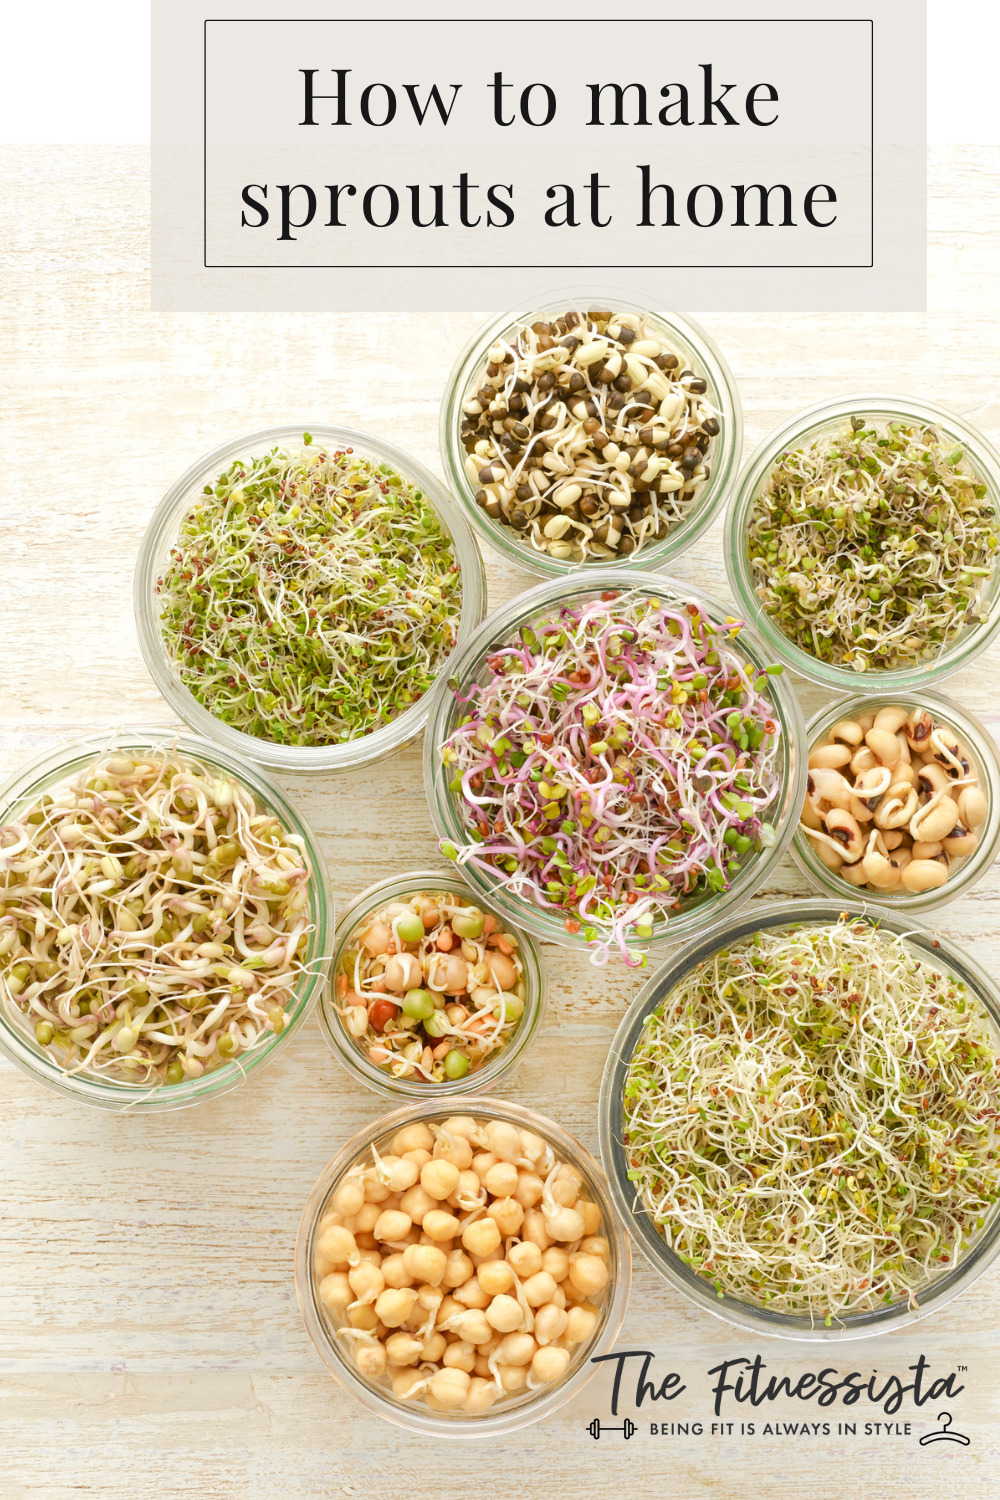 The way to make sprouts at house